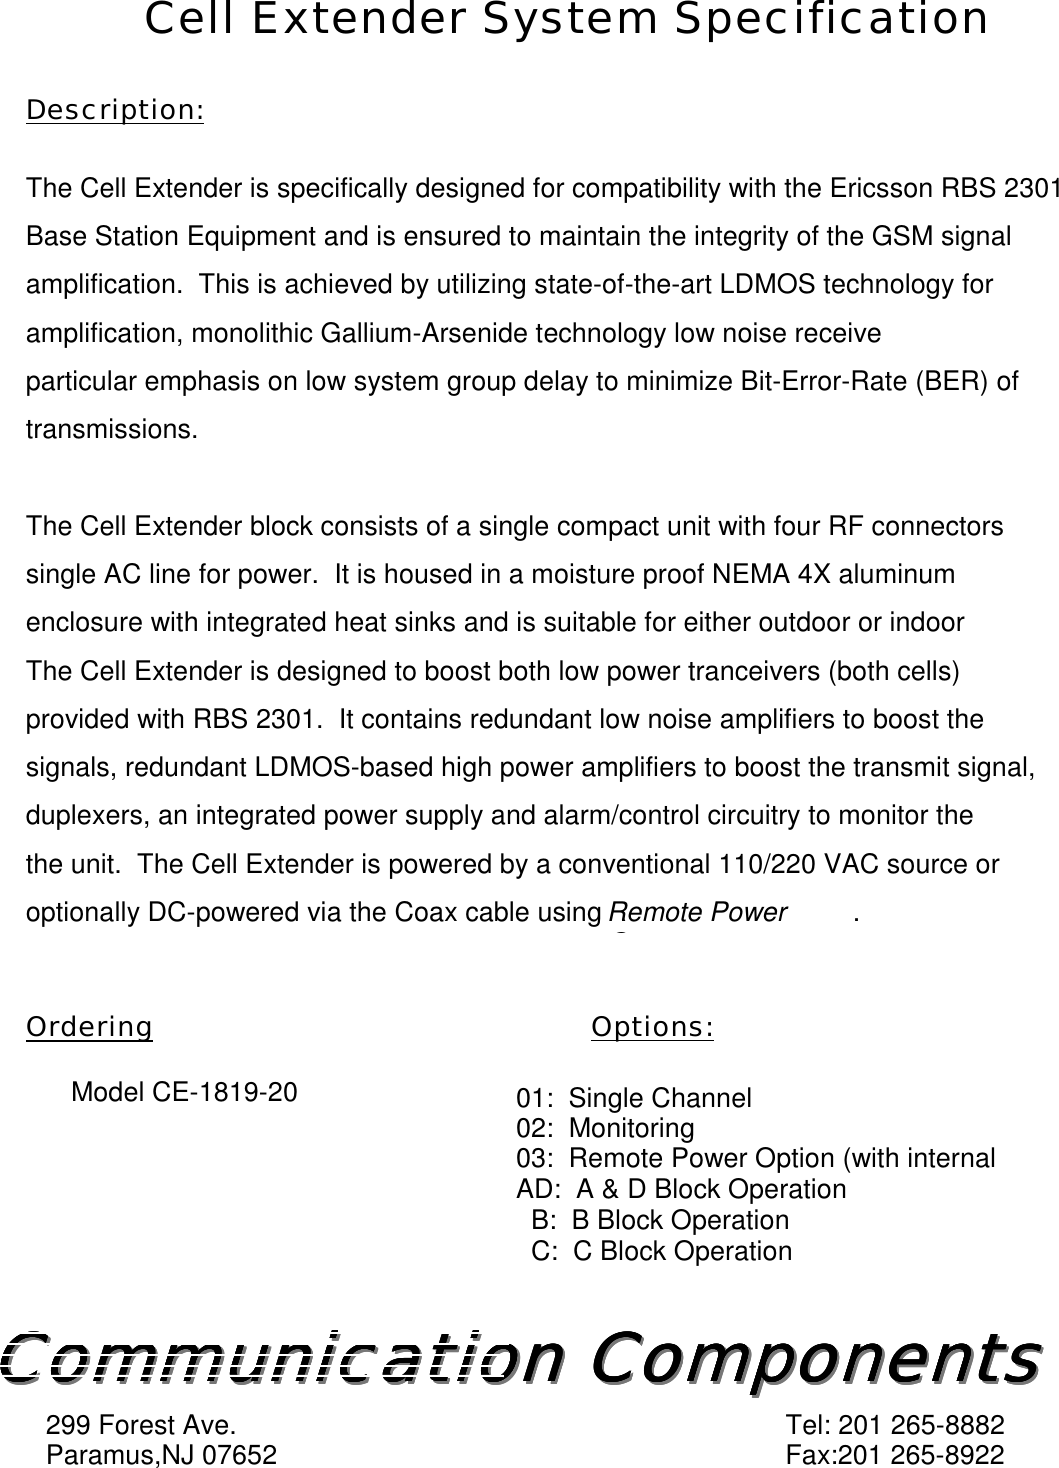 Cell Extender System SpecificationDescription:The Cell Extender is specifically designed for compatibility with the Ericsson RBS 2301Base Station Equipment and is ensured to maintain the integrity of the GSM signalamplification.  This is achieved by utilizing state-of-the-art LDMOS technology foramplification, monolithic Gallium-Arsenide technology low noise receiveparticular emphasis on low system group delay to minimize Bit-Error-Rate (BER) oftransmissions.The Cell Extender block consists of a single compact unit with four RF connectorssingle AC line for power.  It is housed in a moisture proof NEMA 4X aluminumenclosure with integrated heat sinks and is suitable for either outdoor or indoorThe Cell Extender is designed to boost both low power tranceivers (both cells)provided with RBS 2301.  It contains redundant low noise amplifiers to boost thesignals, redundant LDMOS-based high power amplifiers to boost the transmit signal,duplexers, an integrated power supply and alarm/control circuitry to monitor thethe unit.  The Cell Extender is powered by a conventional 110/220 VAC source oroptionally DC-powered via the Coax cable using Remote PowerO.Ordering Options:      Model CE-1819-20 01:  Single Channel02:  Monitoring03:  Remote Power Option (with internalAD:  A &amp; D Block Operation  B:  B Block Operation  C:  C Block OperationCommunication ComponentsCommunication ComponentsCommunication ComponentsCommunication ComponentsCommunication ComponentsCommunication ComponentsCommunication ComponentsCommunication Components299 Forest Ave. Tel: 201 265-8882Paramus,NJ 07652 Fax:201 265-8922